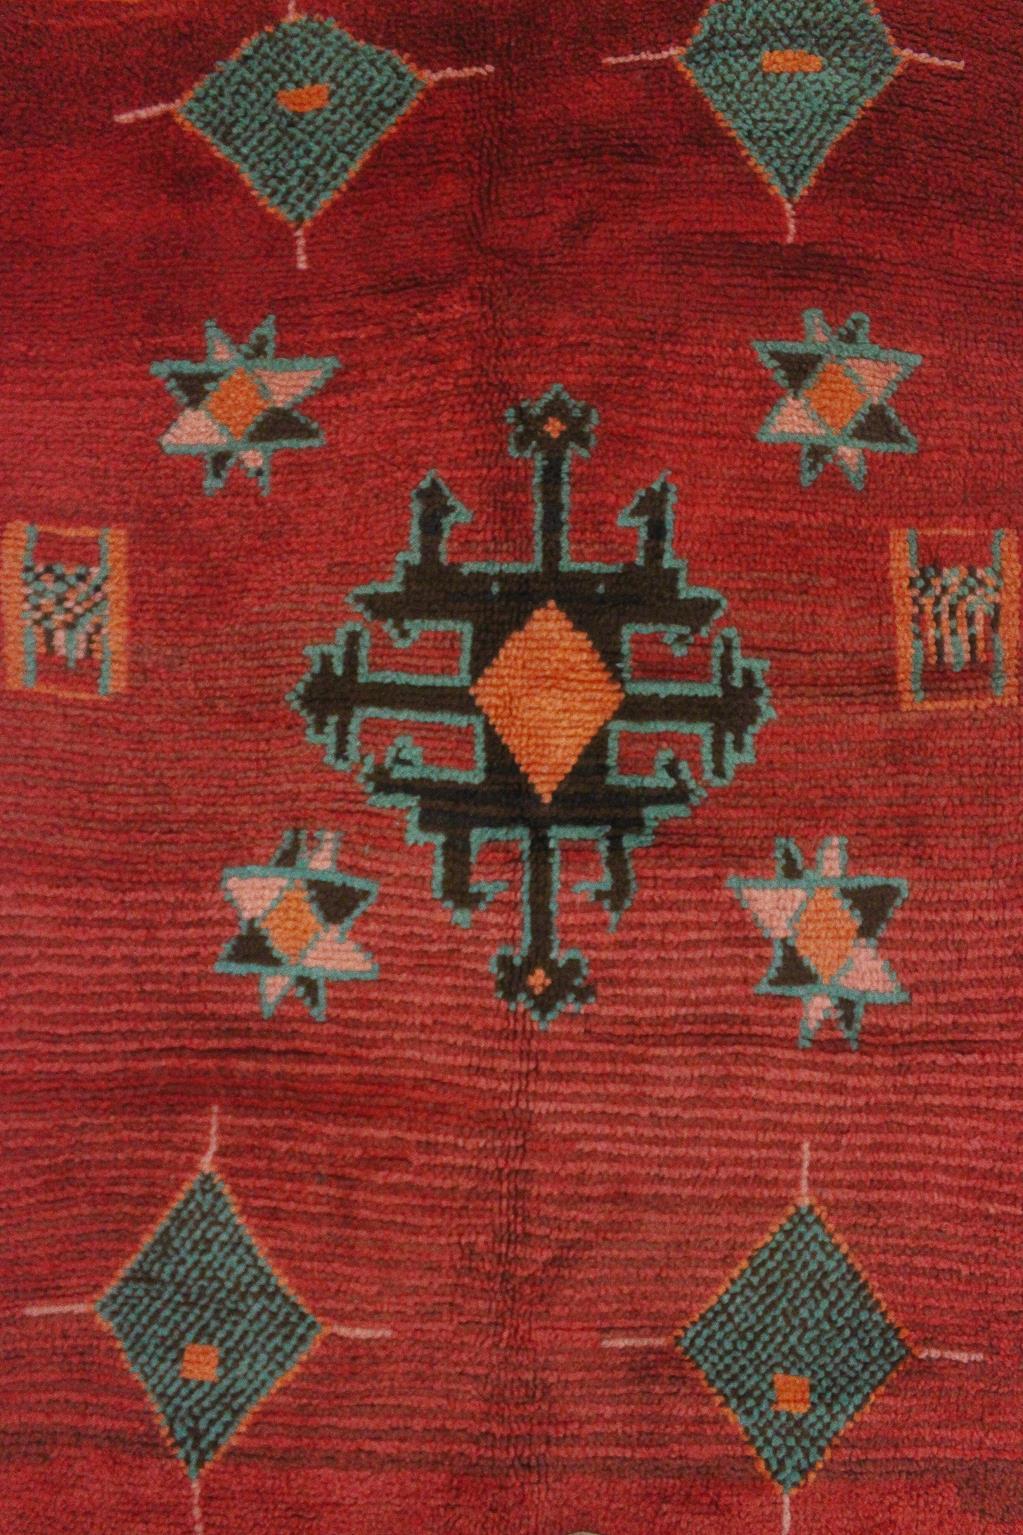 Vintage Moroccan Azilal rug - Red and turquoise - 4.1x5.8feet / 127x177cm For Sale 2